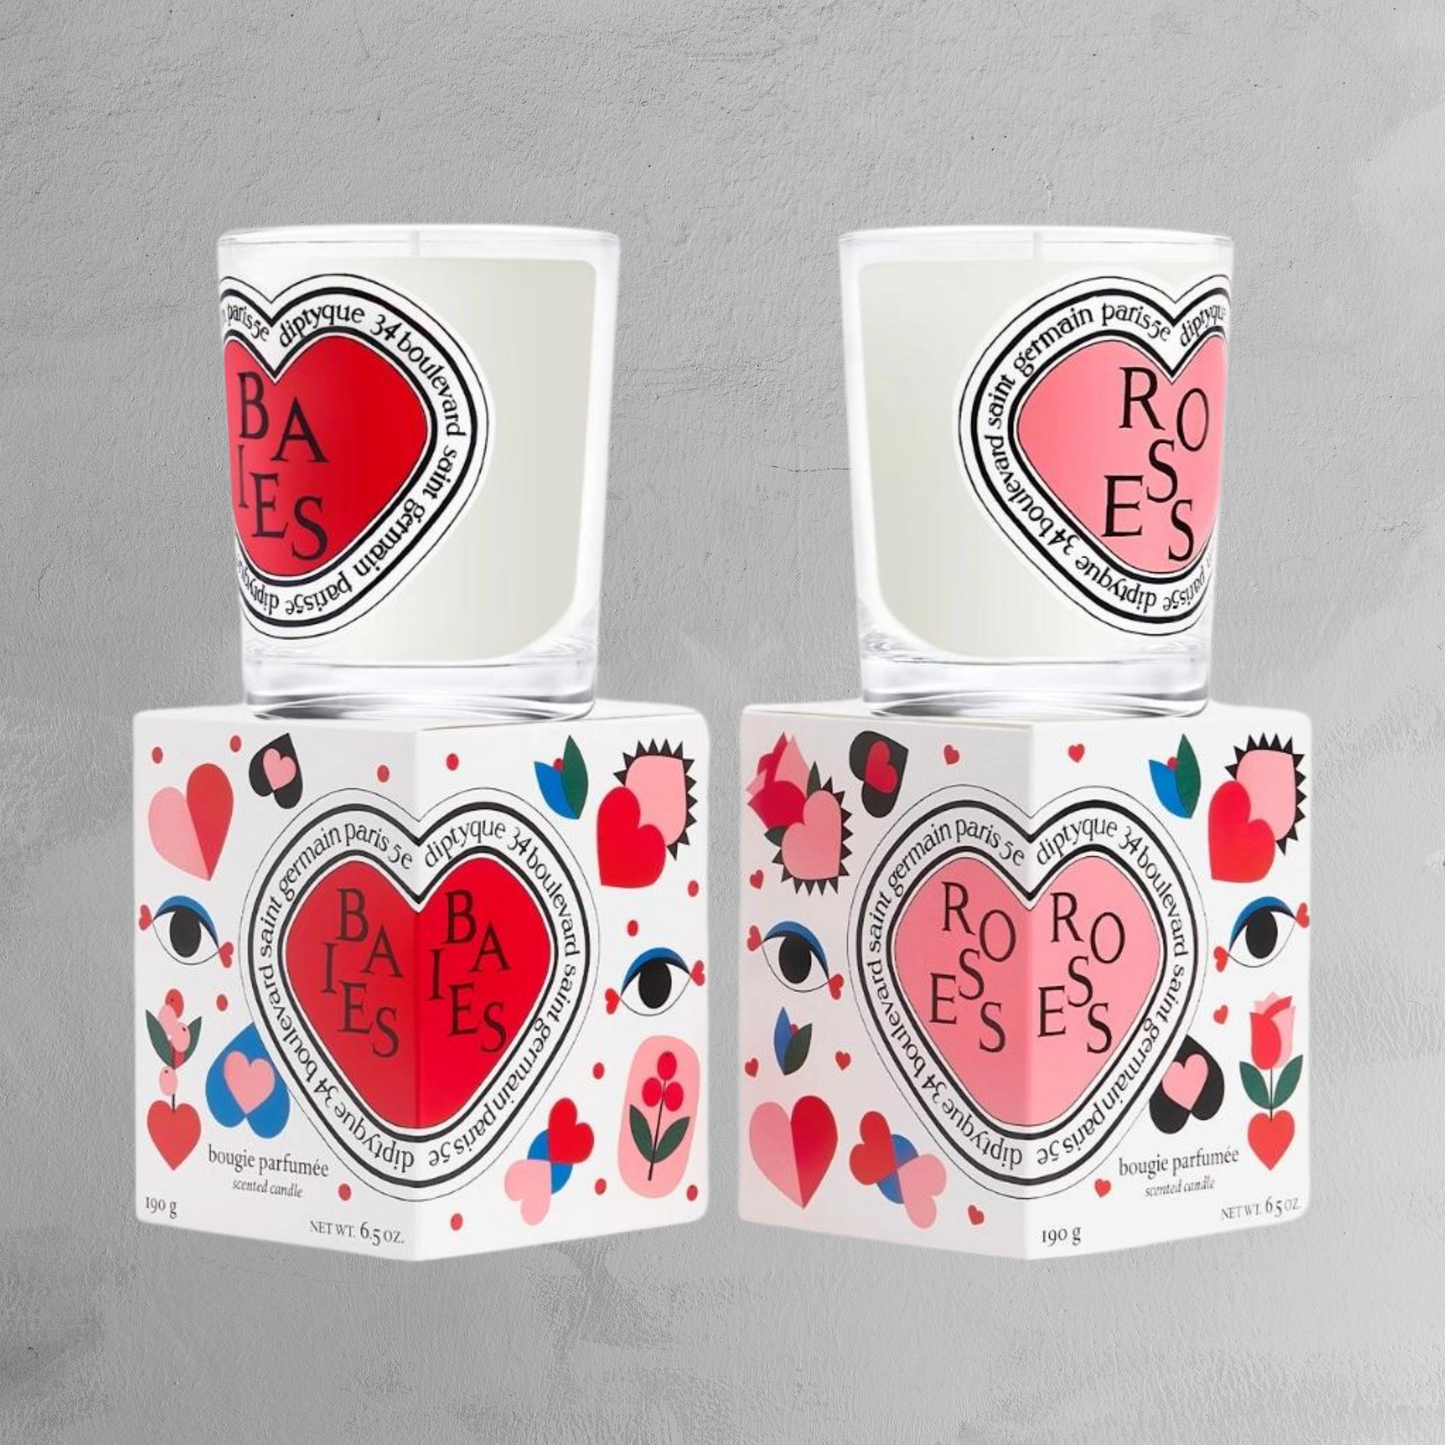 Diptyque -Baies (Berries) and Roses Duo Classic Candles (Valentine’s Day Edition)